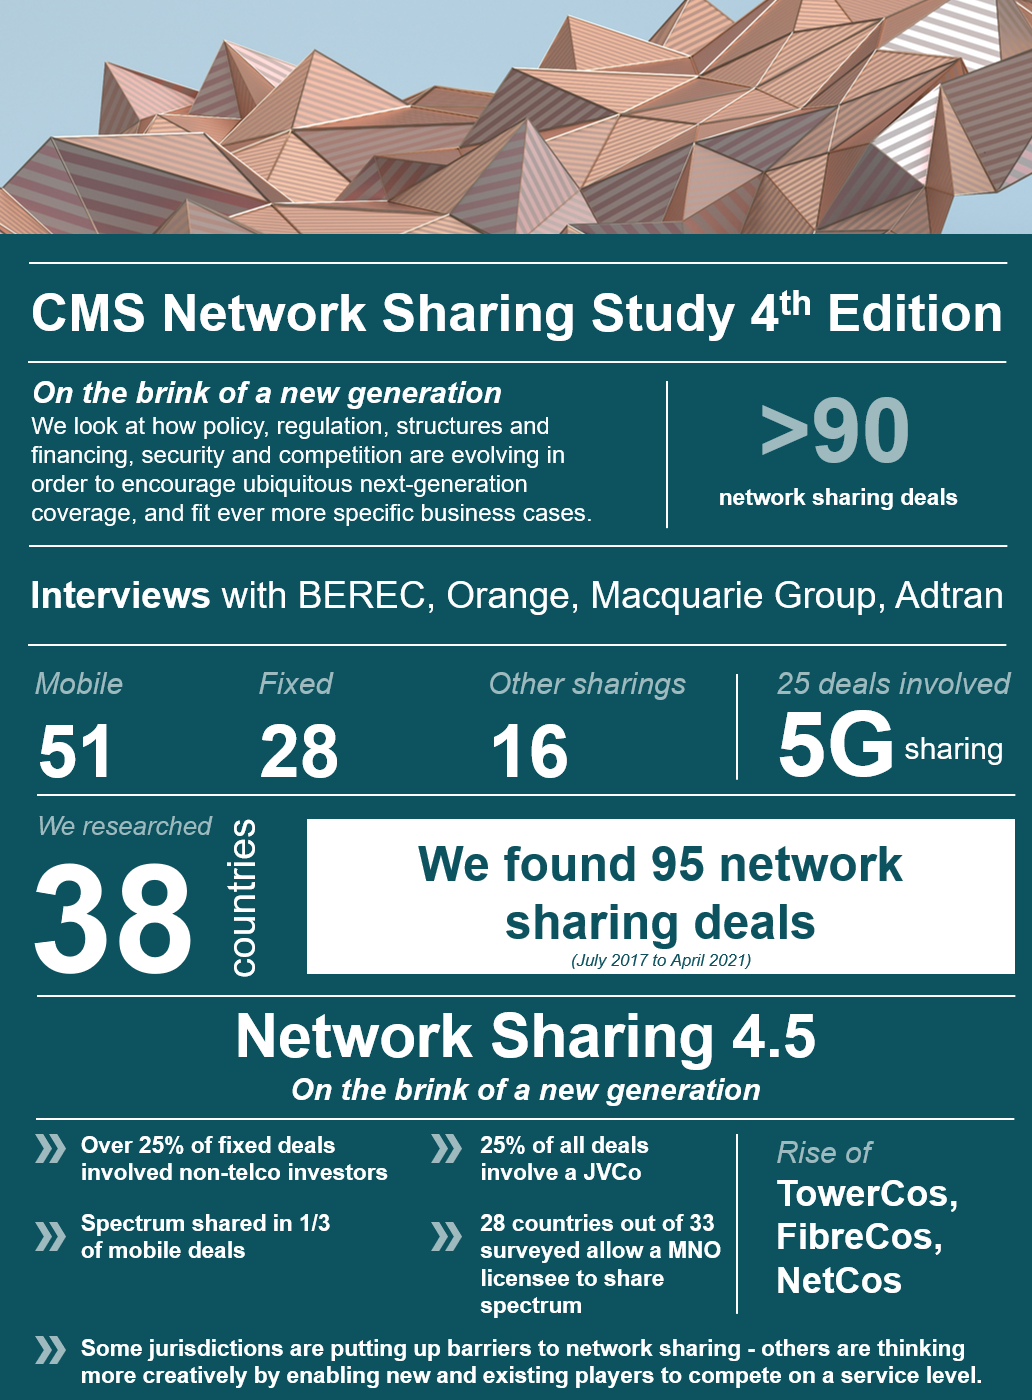 CMS Network sharing at a glance infographic